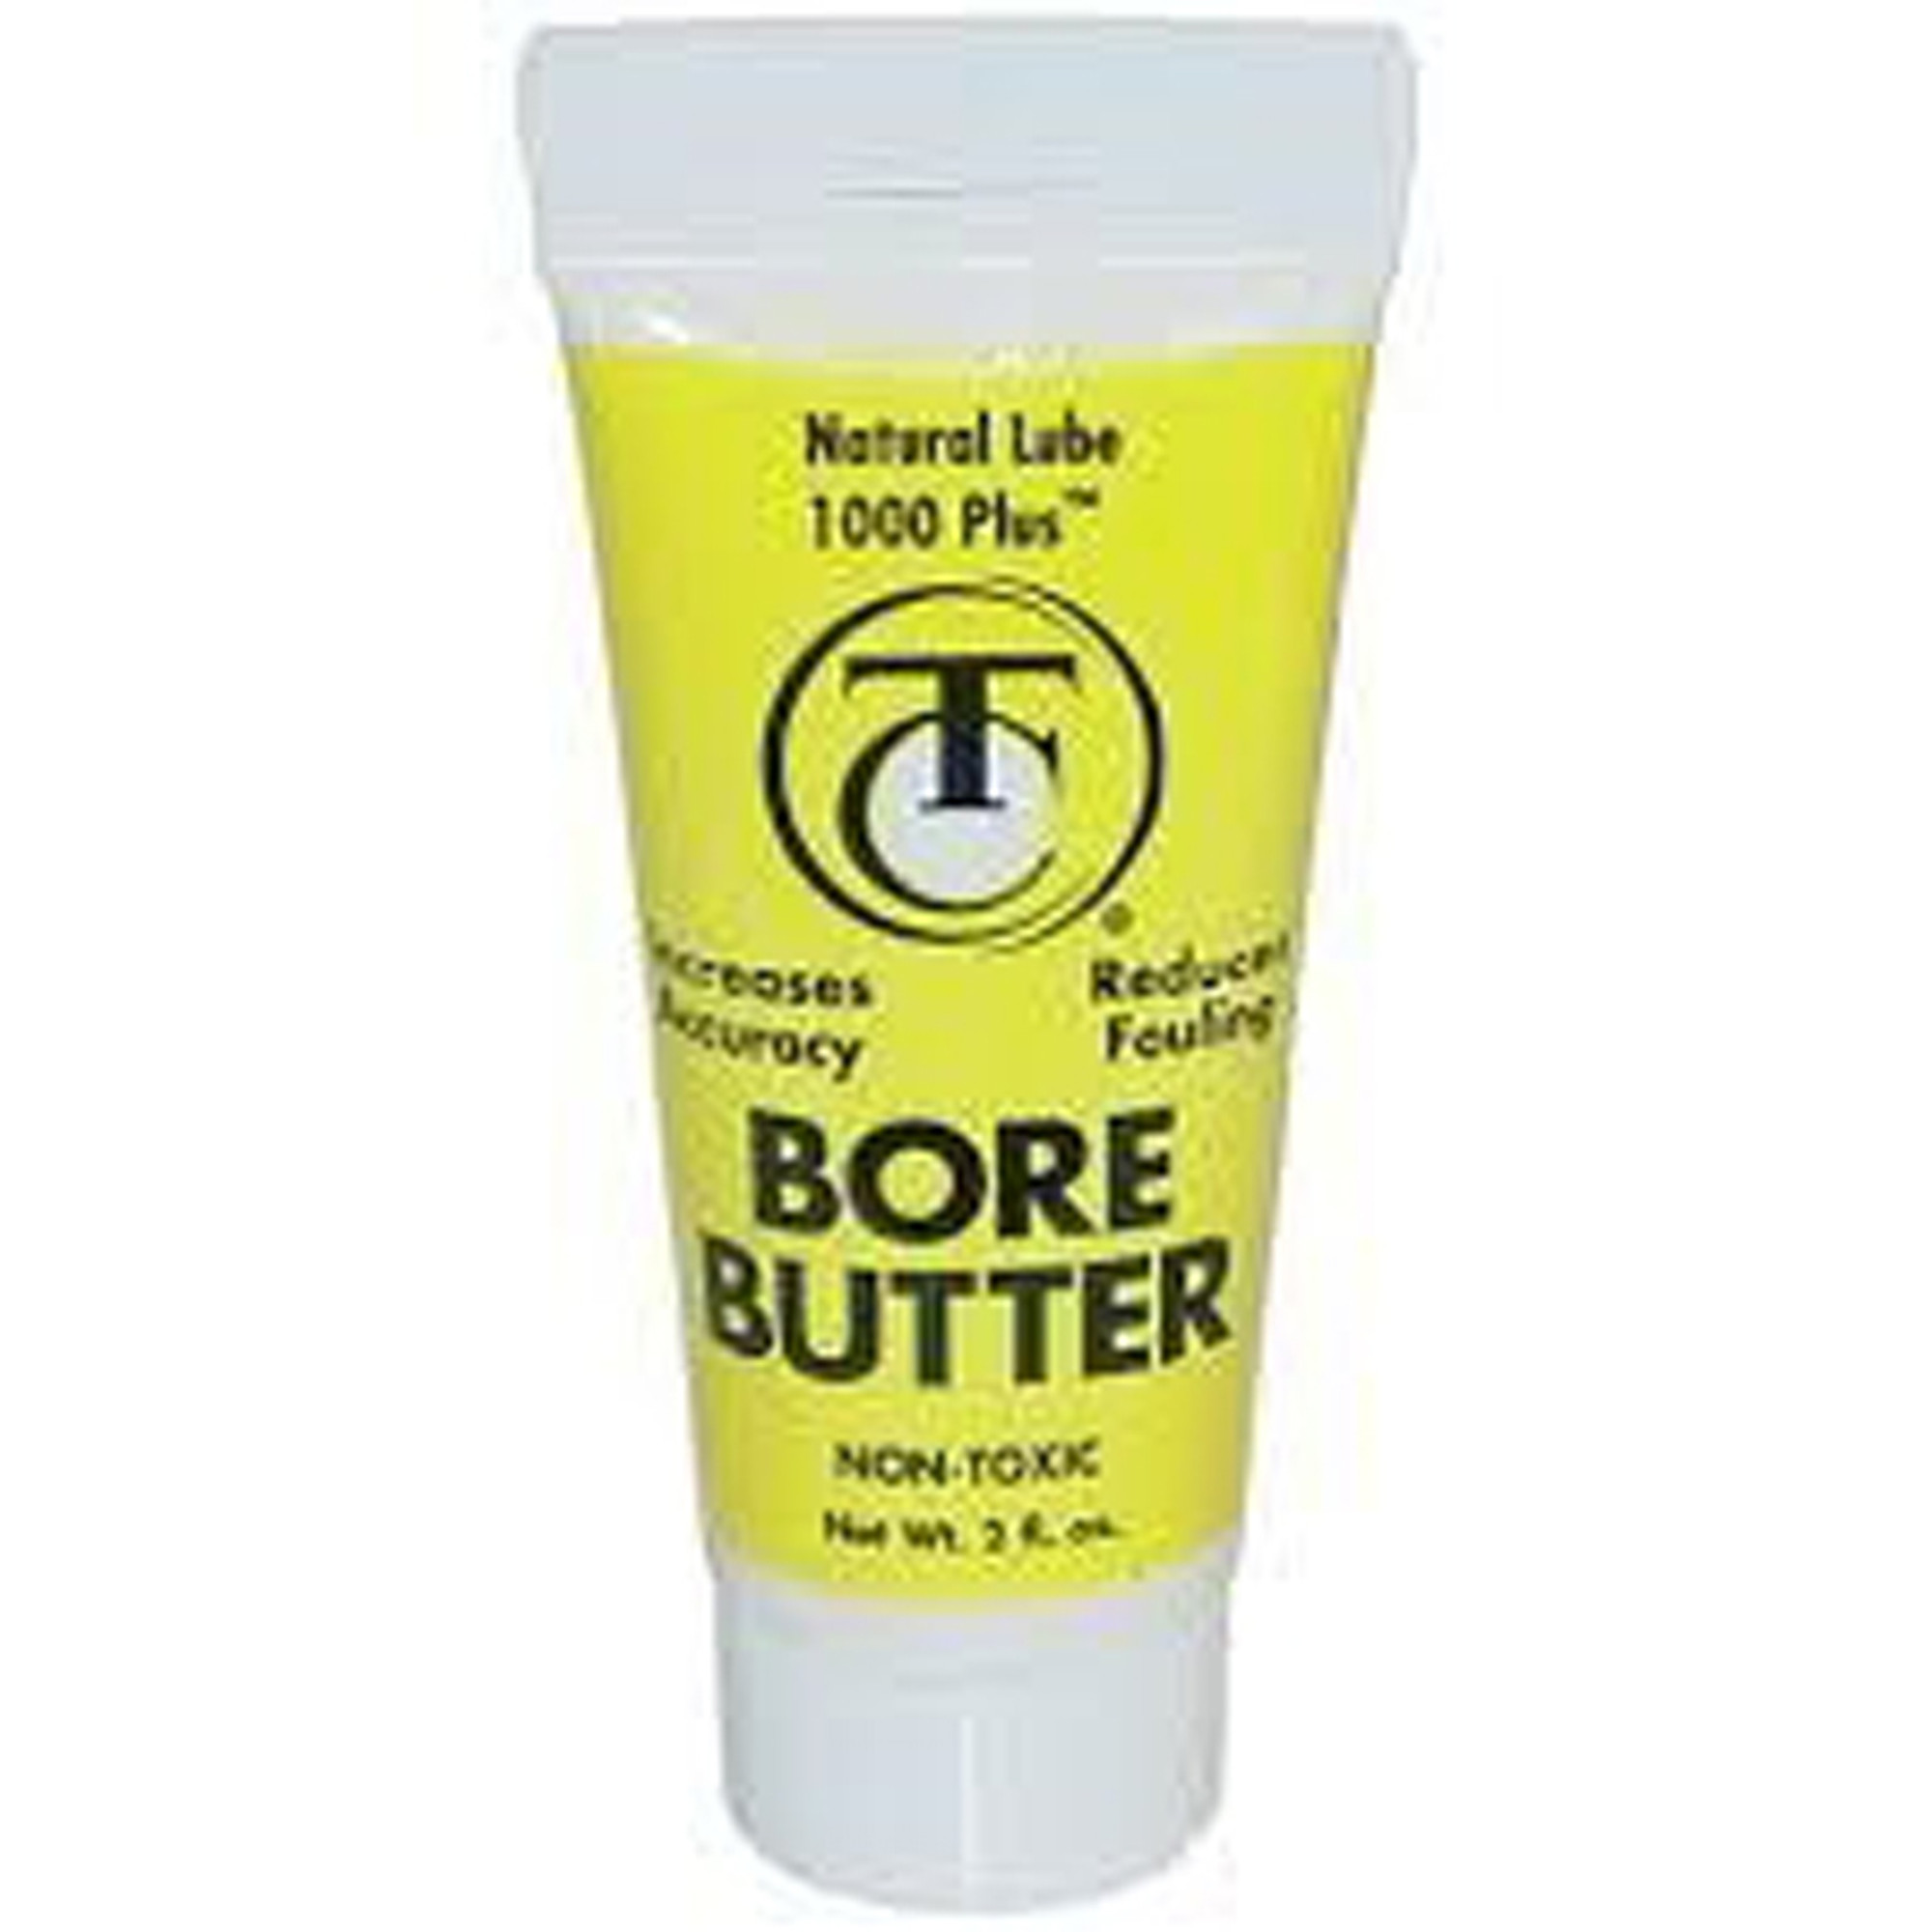 Natural Lube 1000+ Bore Butter 2 Oz.Tube